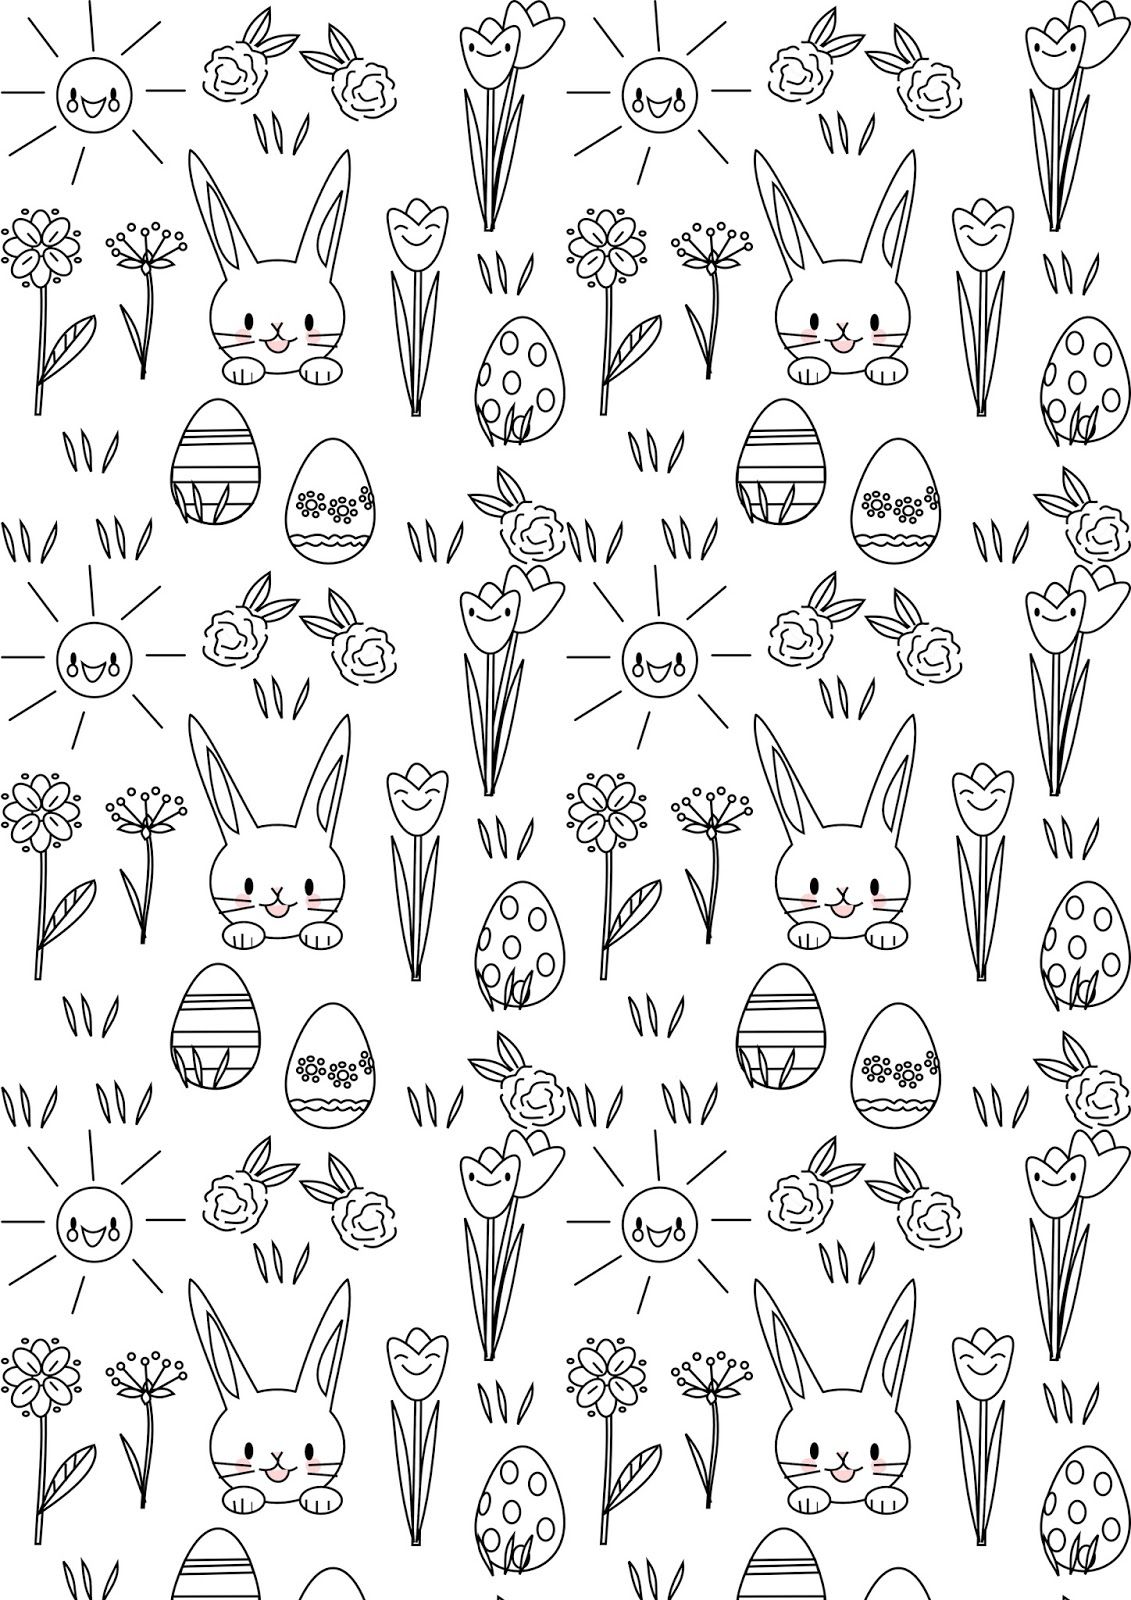 Unleash your creativity with this free printable easter coloring page